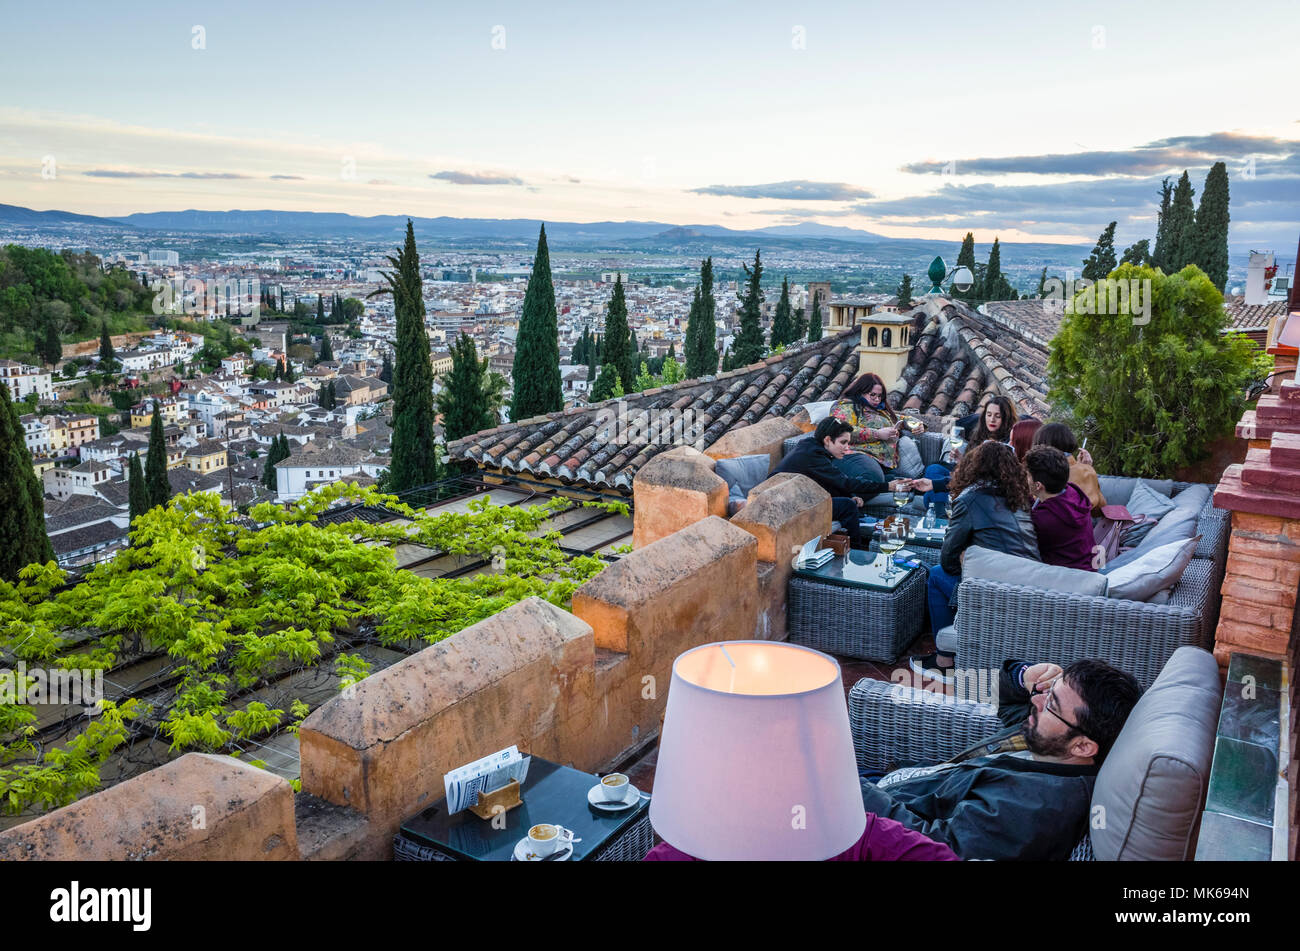 Granada, Andalusia, Spain - April 29th, 2018 : Tourists at Huerto de Juan Ranas cafe and restaurant in the Unesco listed Albaicin district old town, e Stock Photo